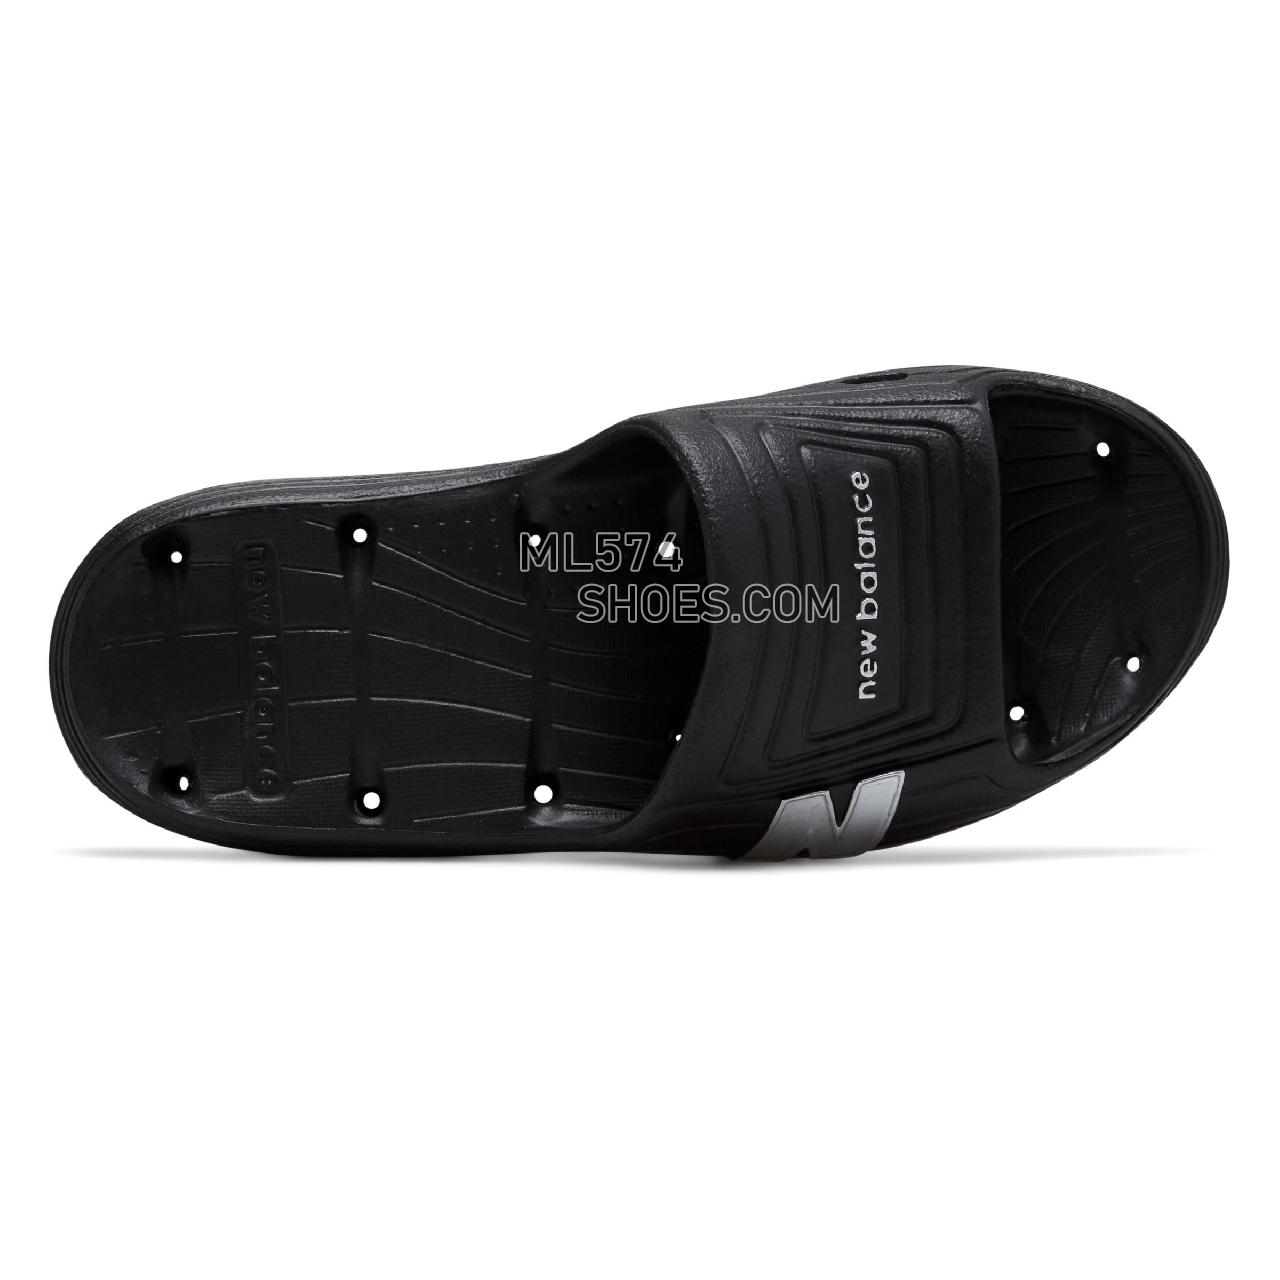 New Balance Float Slide - Men's 106 - Sandals Black with Silver - SD106BS